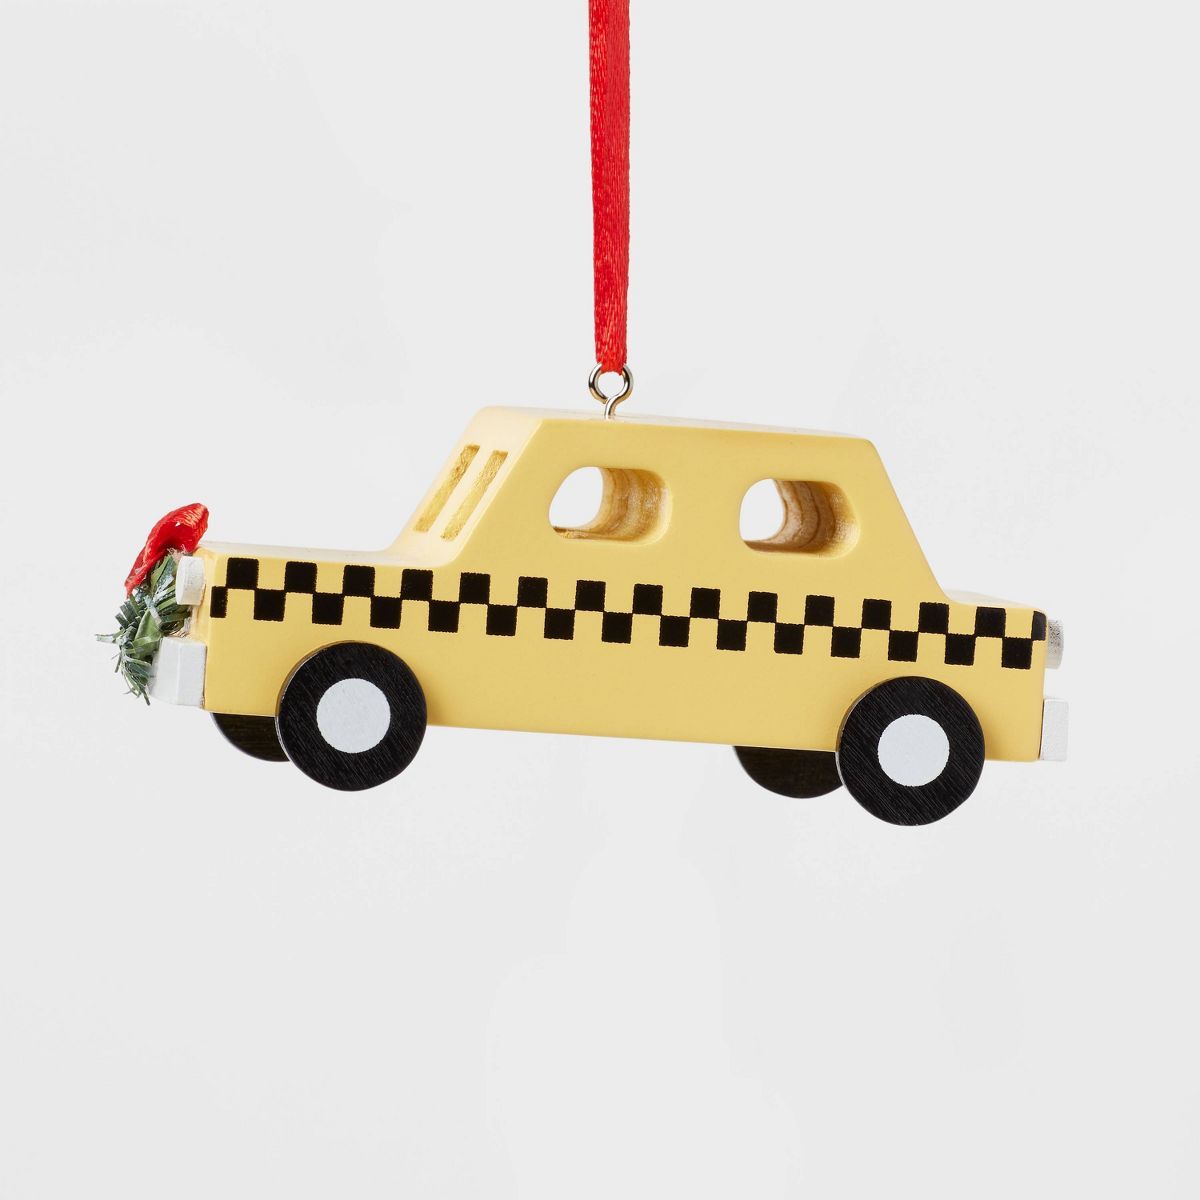 Wood Taxi with Wreath Christmas Tree Ornament Yellow - Wondershop™ | Target